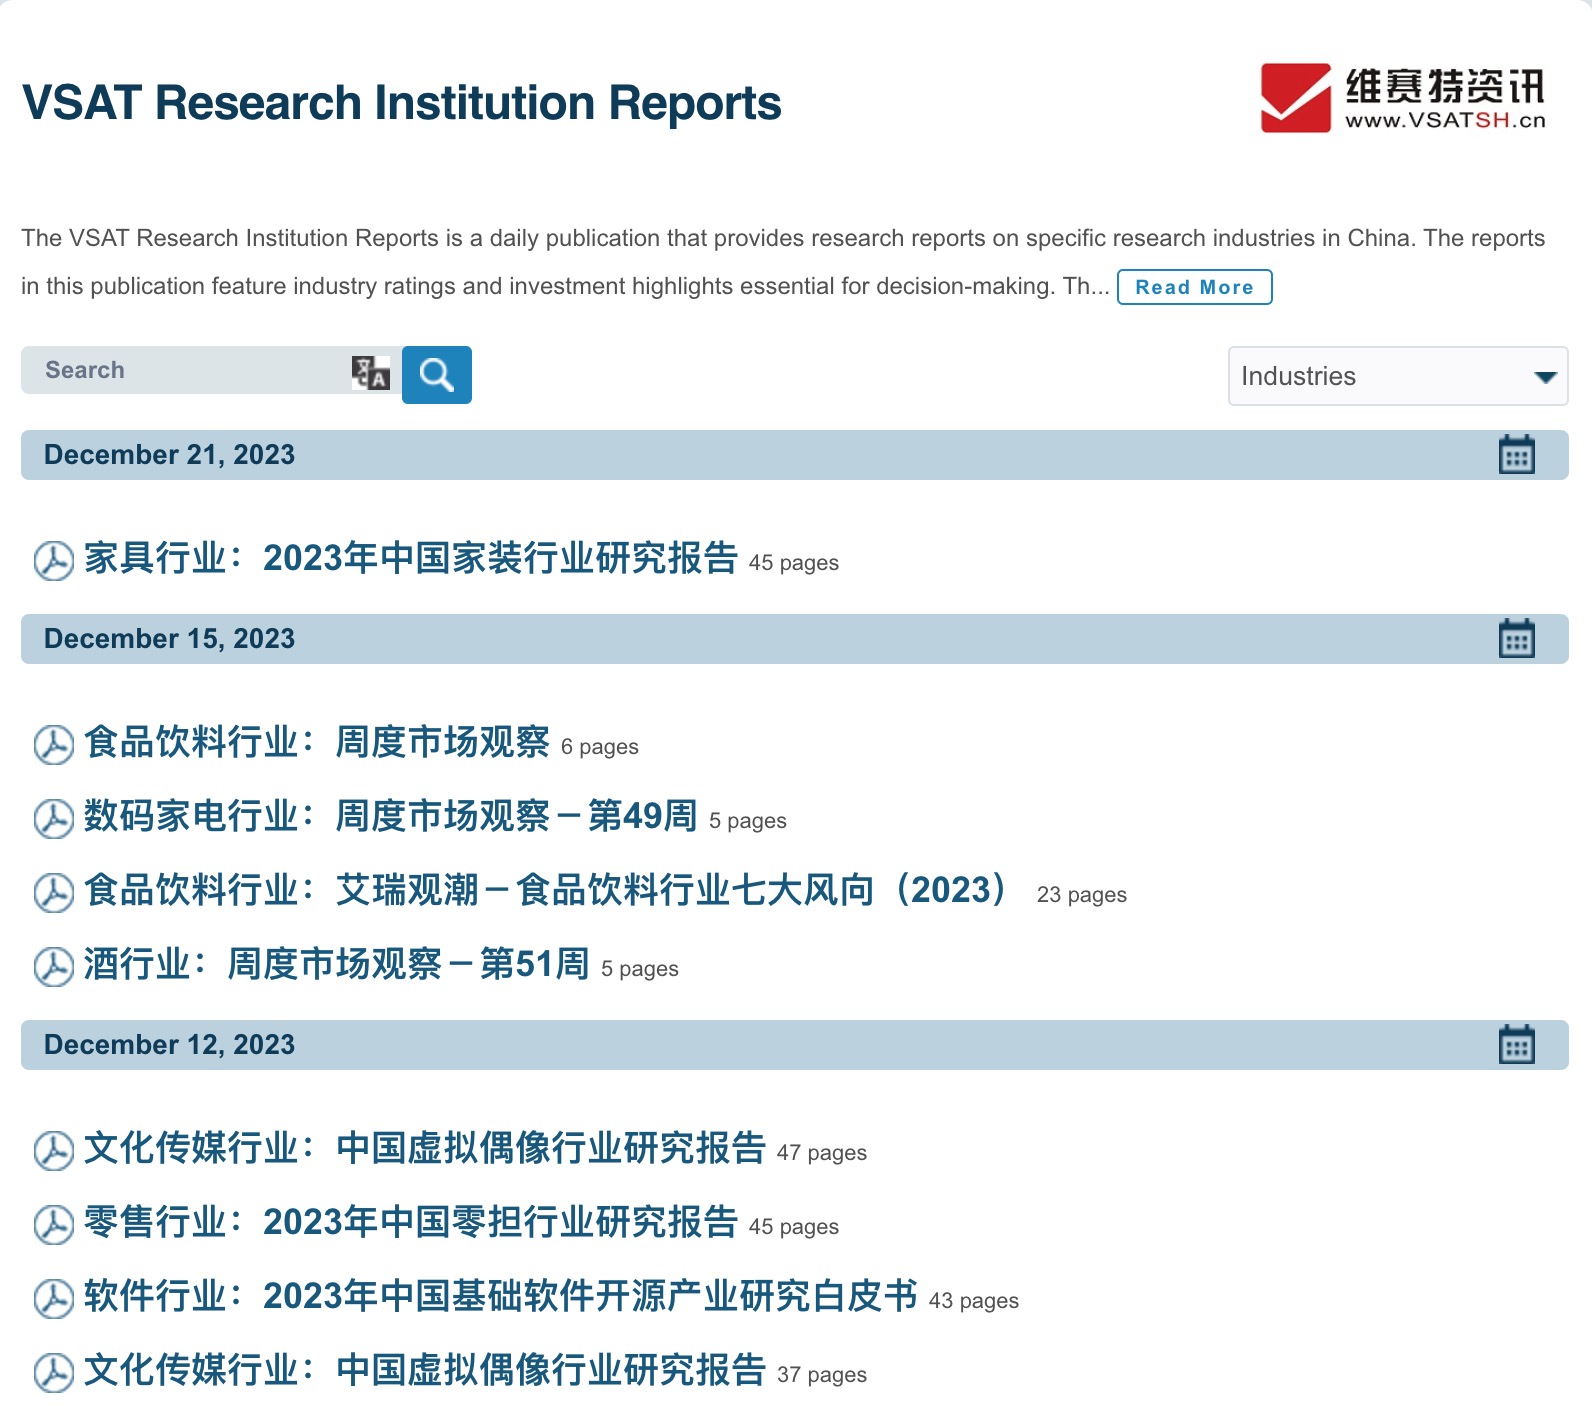 VSAT Research Institution Reports